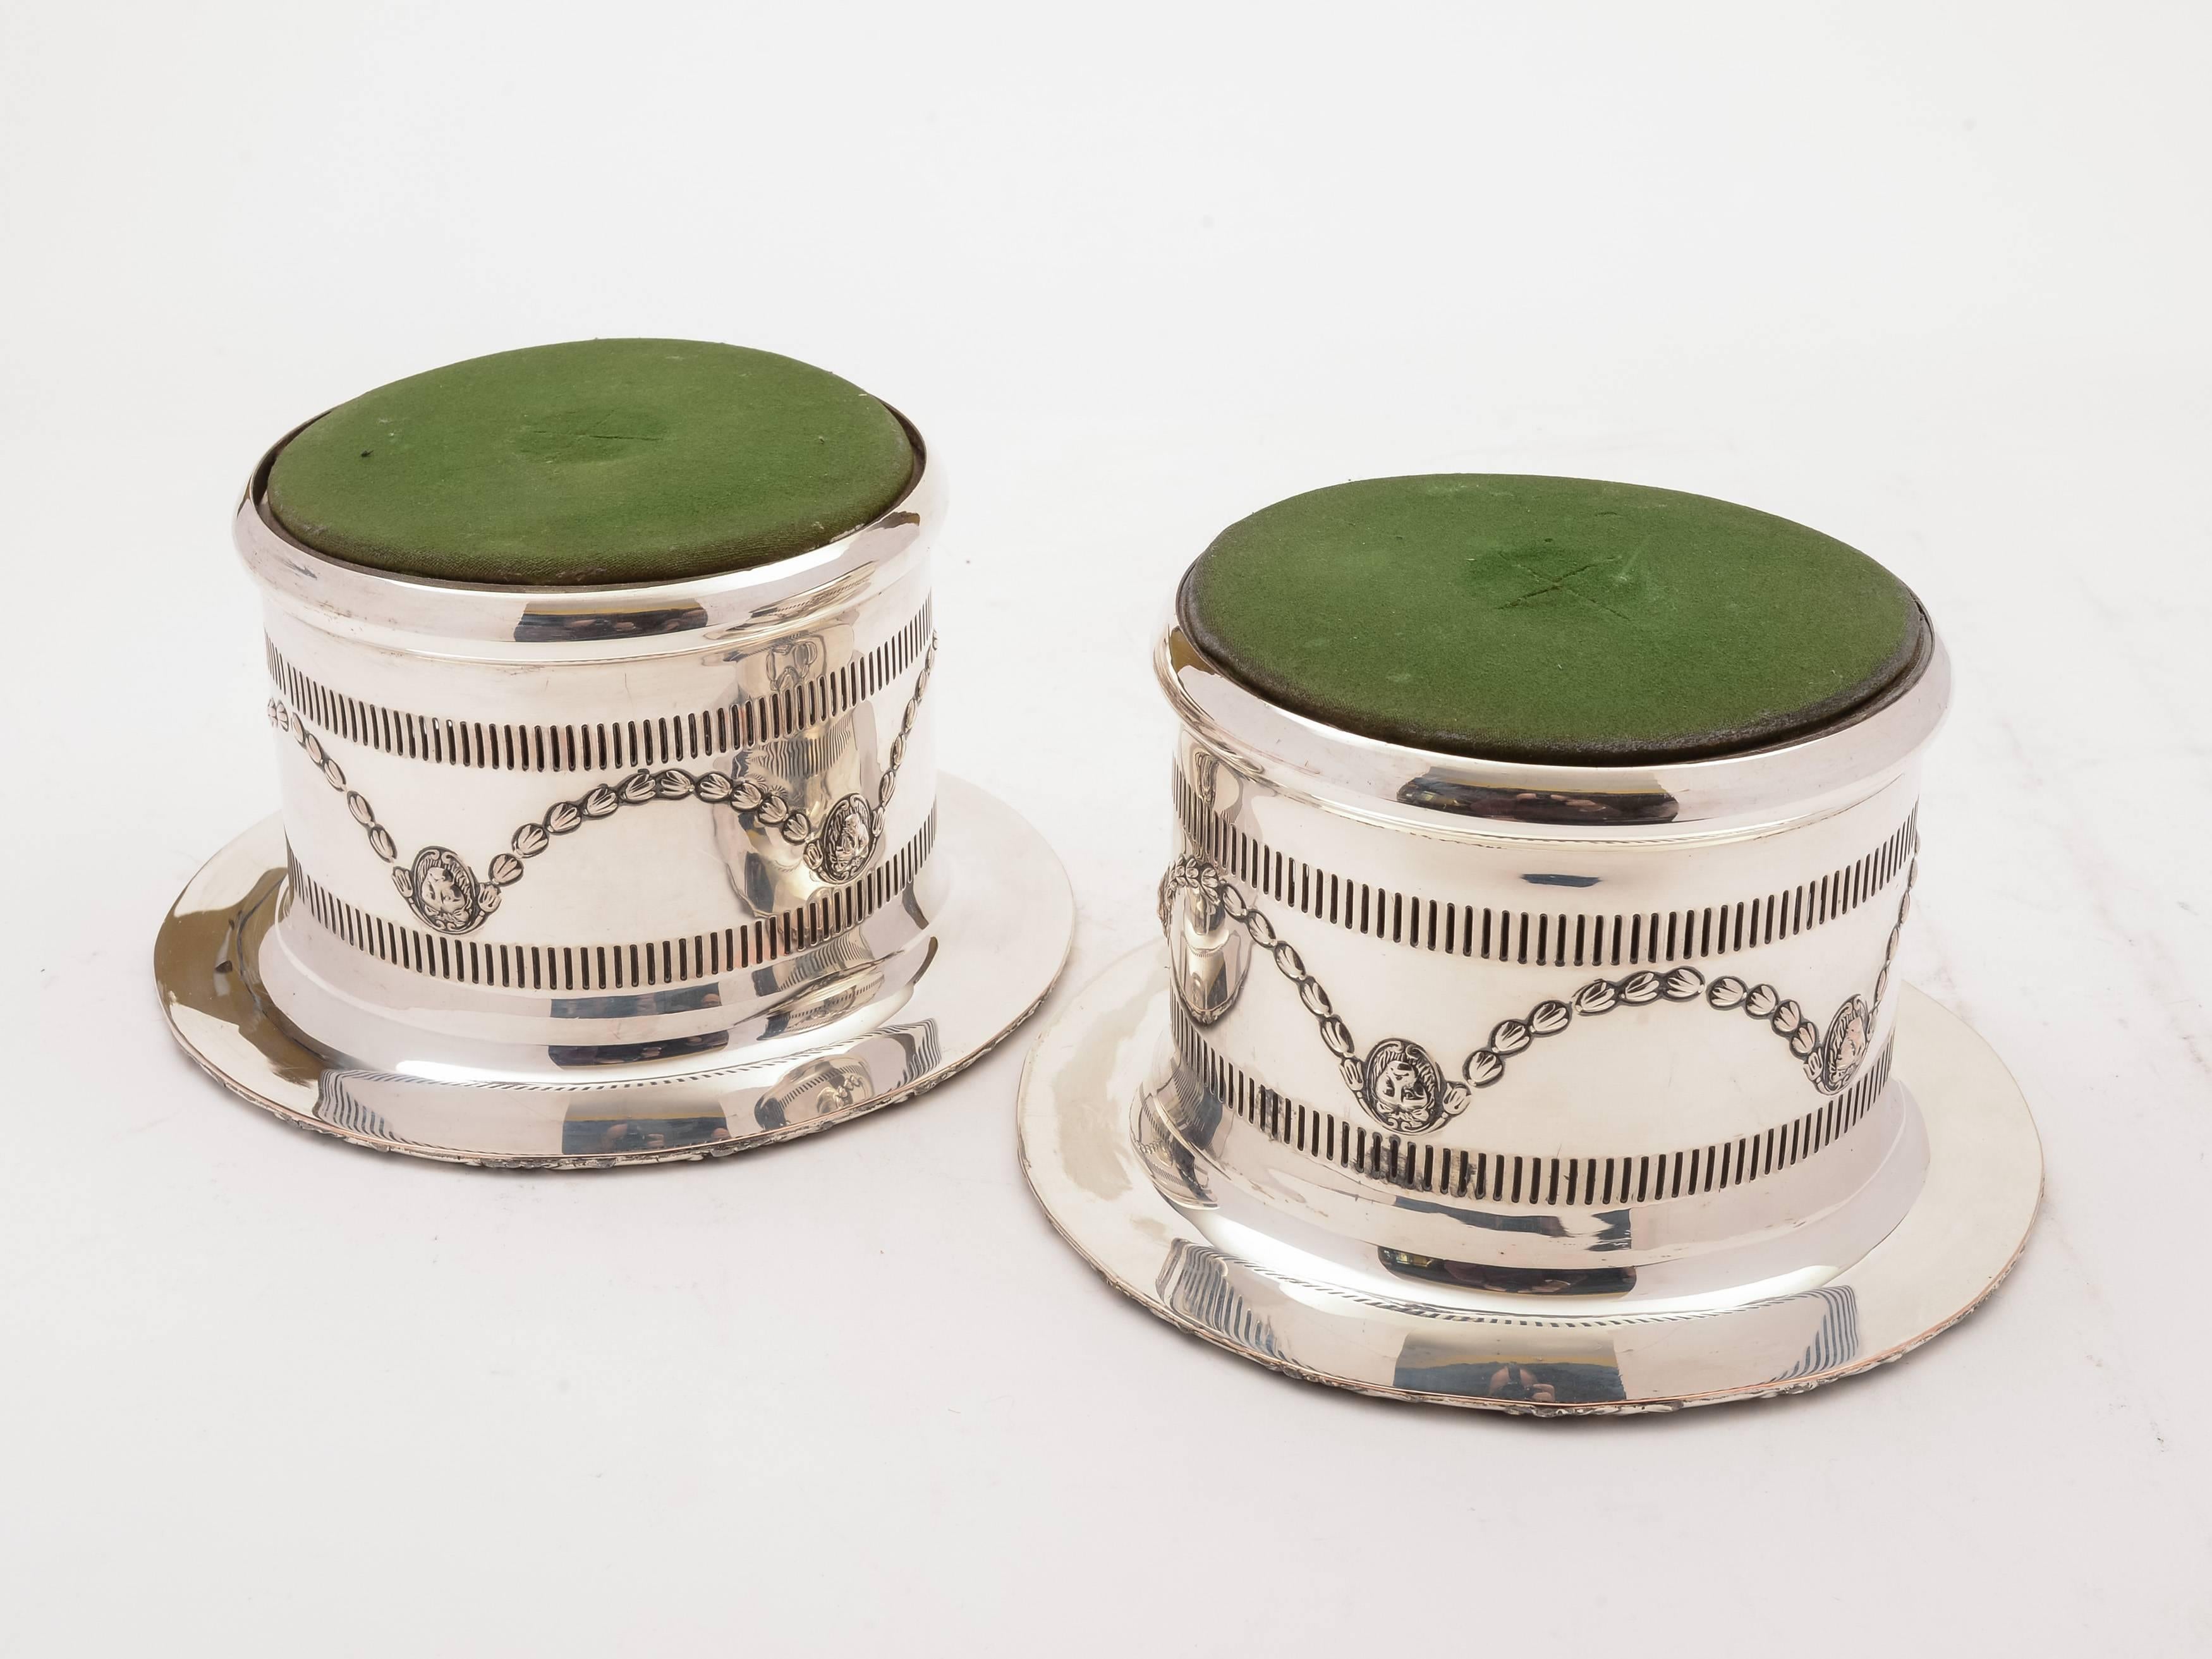 Pair of Edwardian Silver Plated Champagne Coasters, circa 1905 In Good Condition For Sale In Umberleigh, Devon